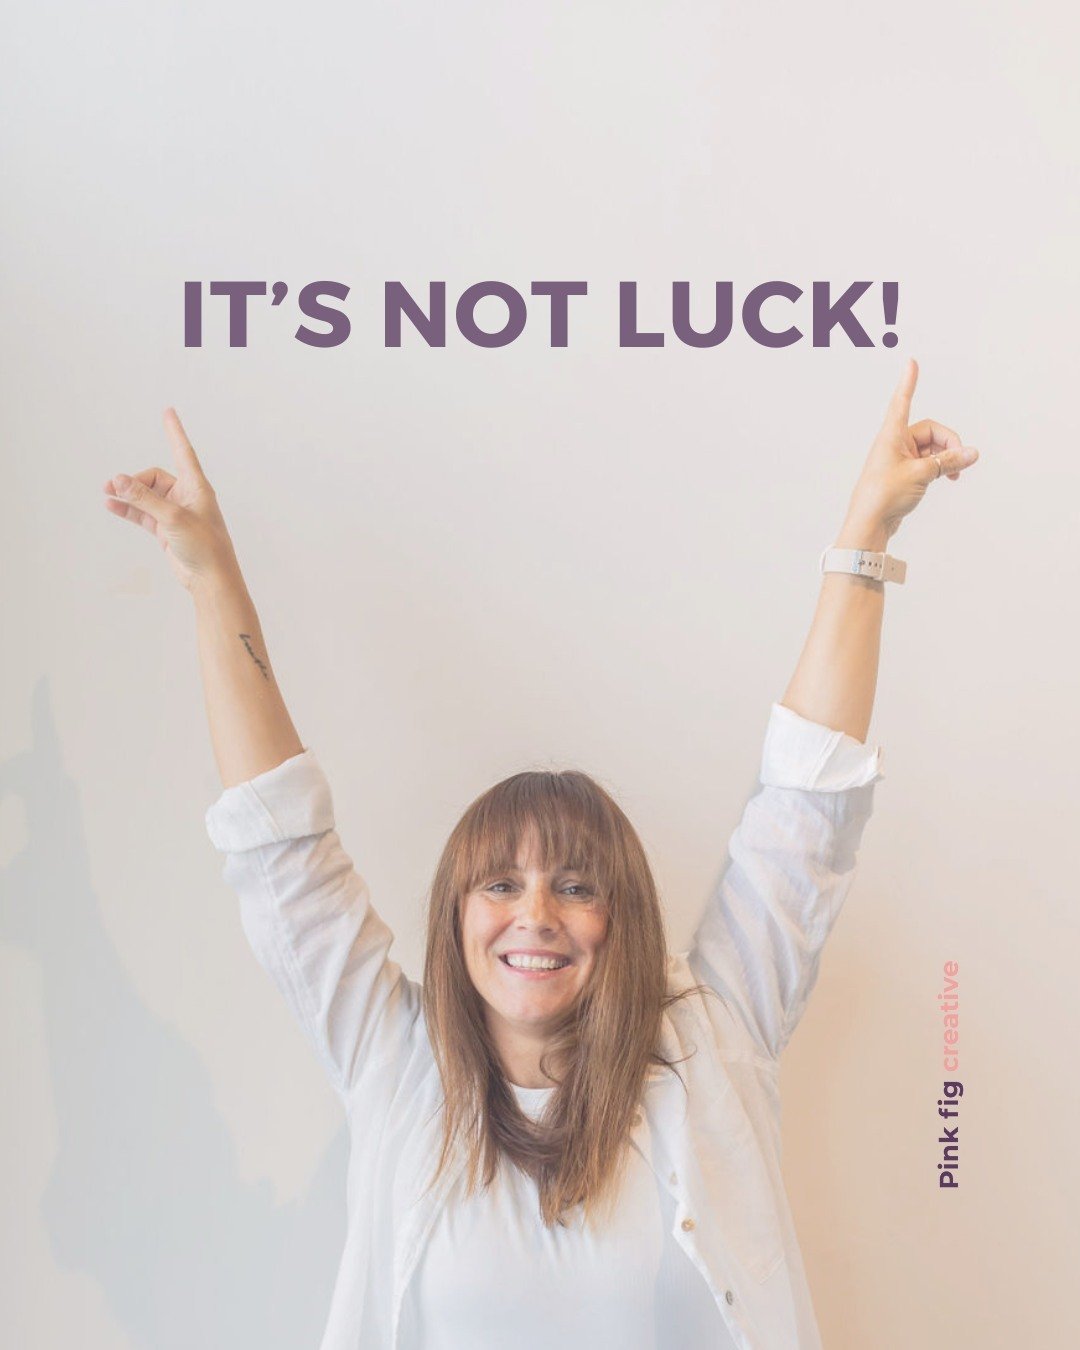 Time for a little PSA: Stop calling it luck. You&rsquo;re not lucky; you&rsquo;re downright amazing at what you do. 💫 Success isn&rsquo;t a lottery ticket you find under your sofa cushions. It&rsquo;s the result of your talent, your grit, and the en